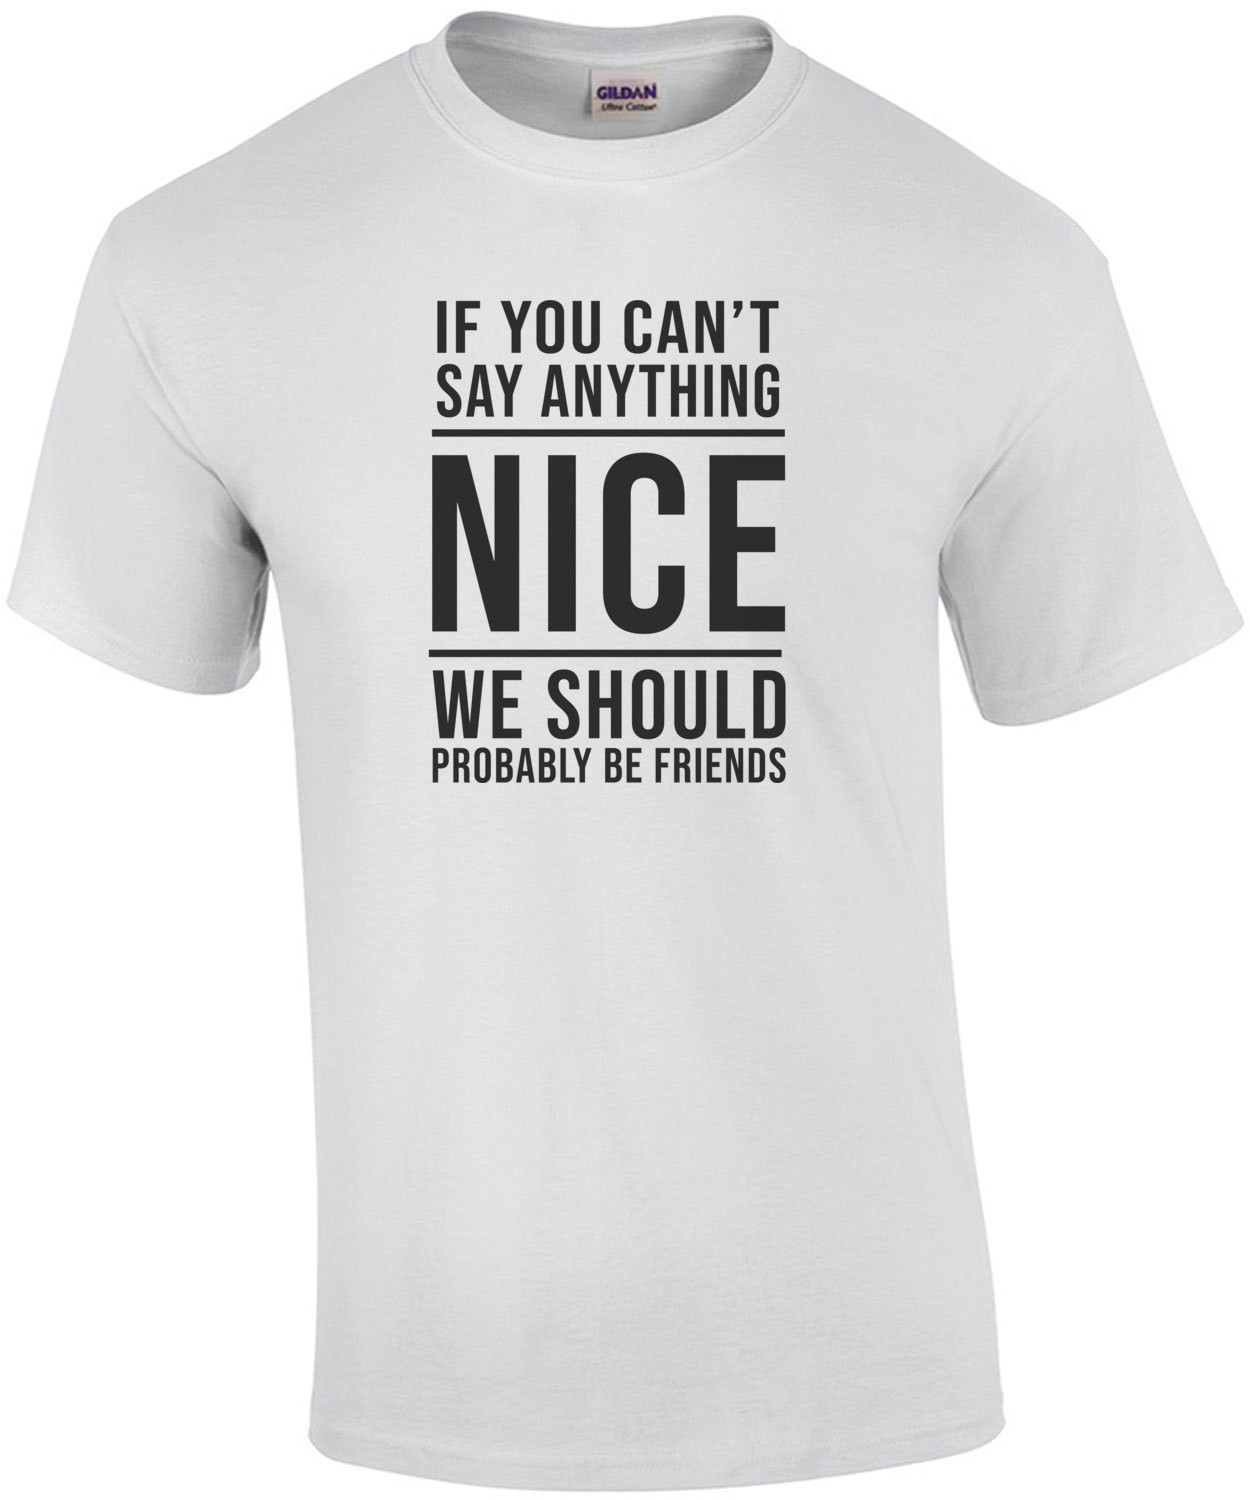 If you can't say anything nice - We should probably be friends - sarcastic t-shirt